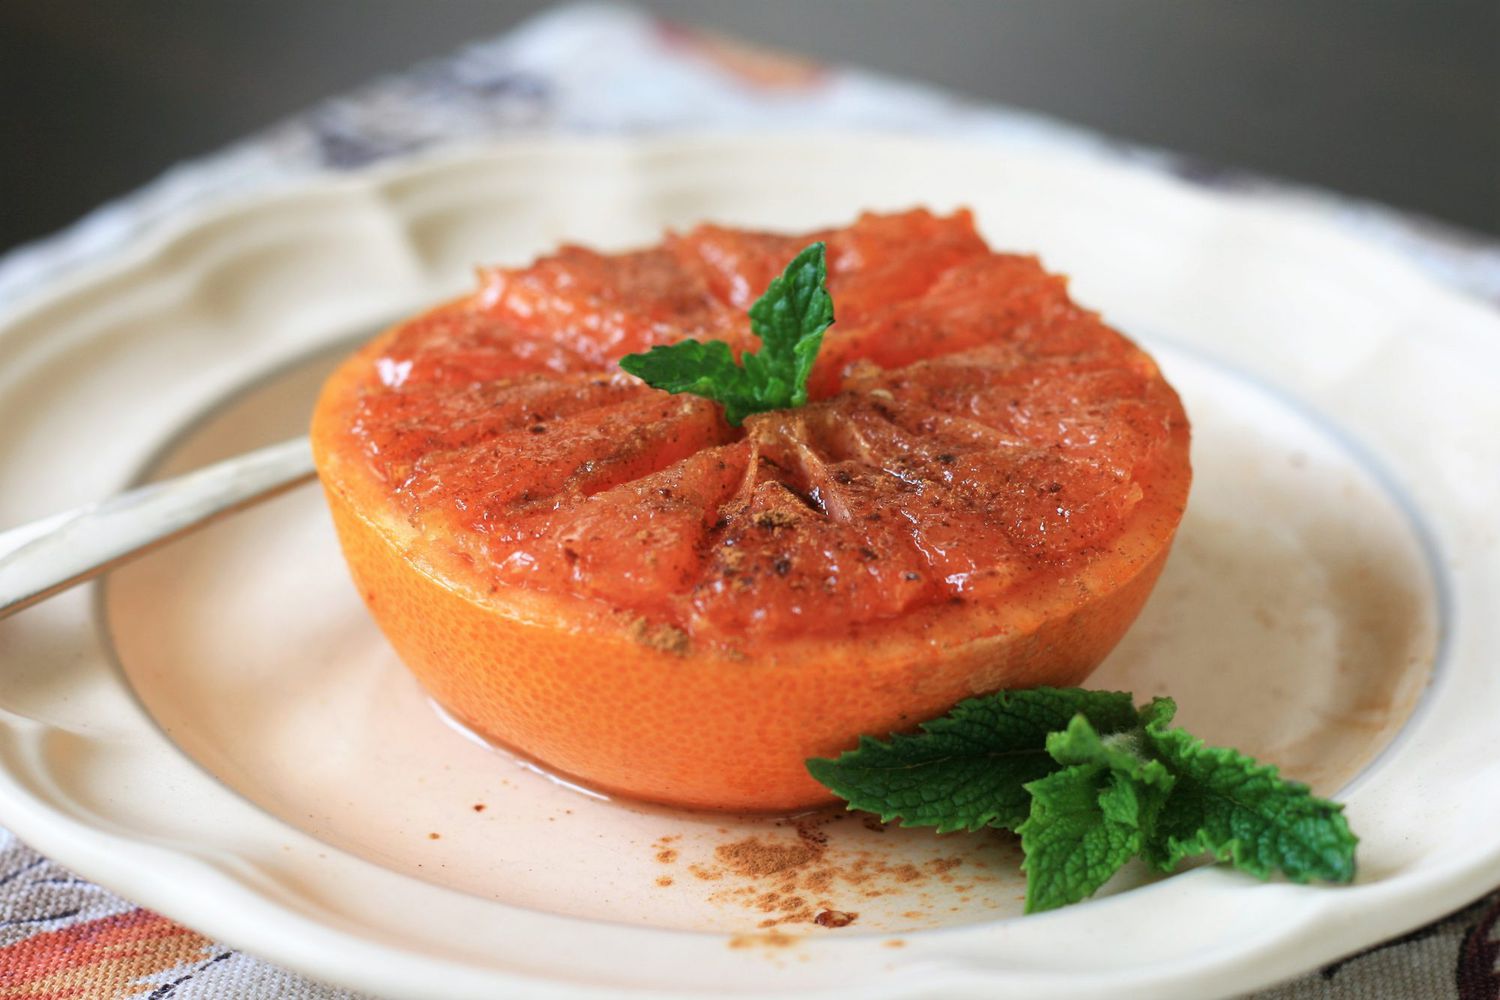 a grapefruit half sprinkled with brown sugar and cinnamon, garnished with a mint sprig, on a white plate